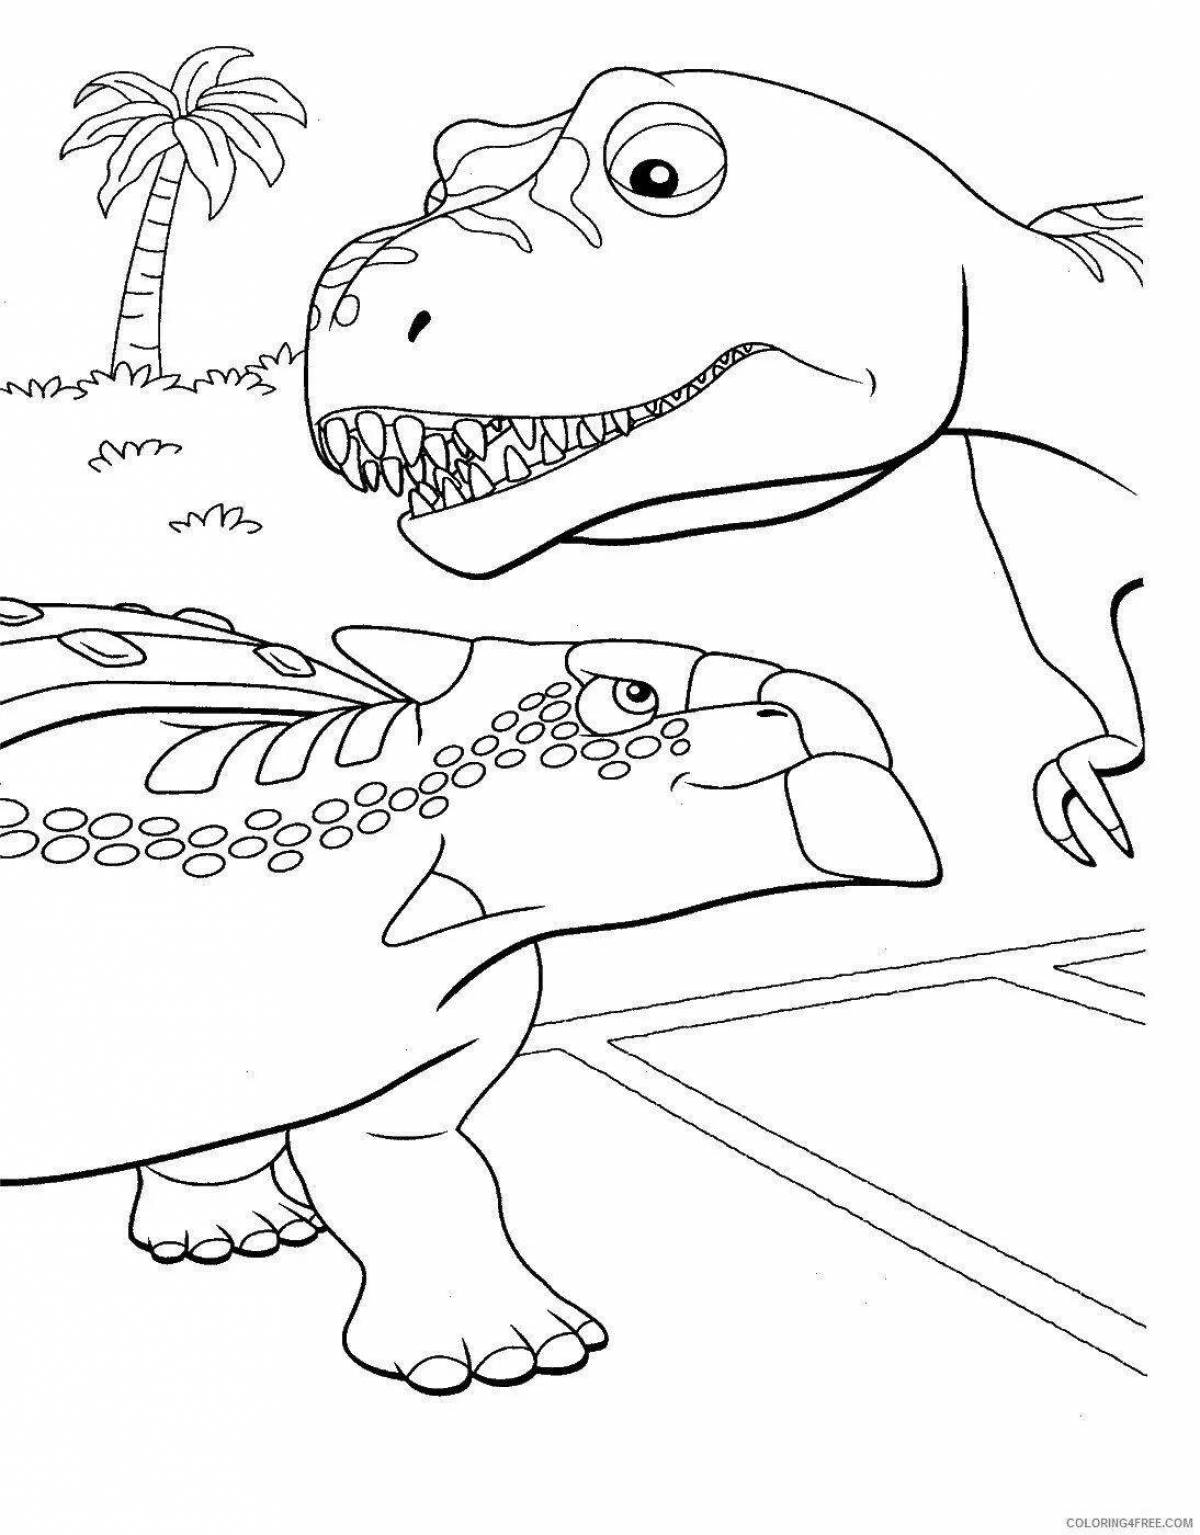 Inspirational dinosaur coloring pages